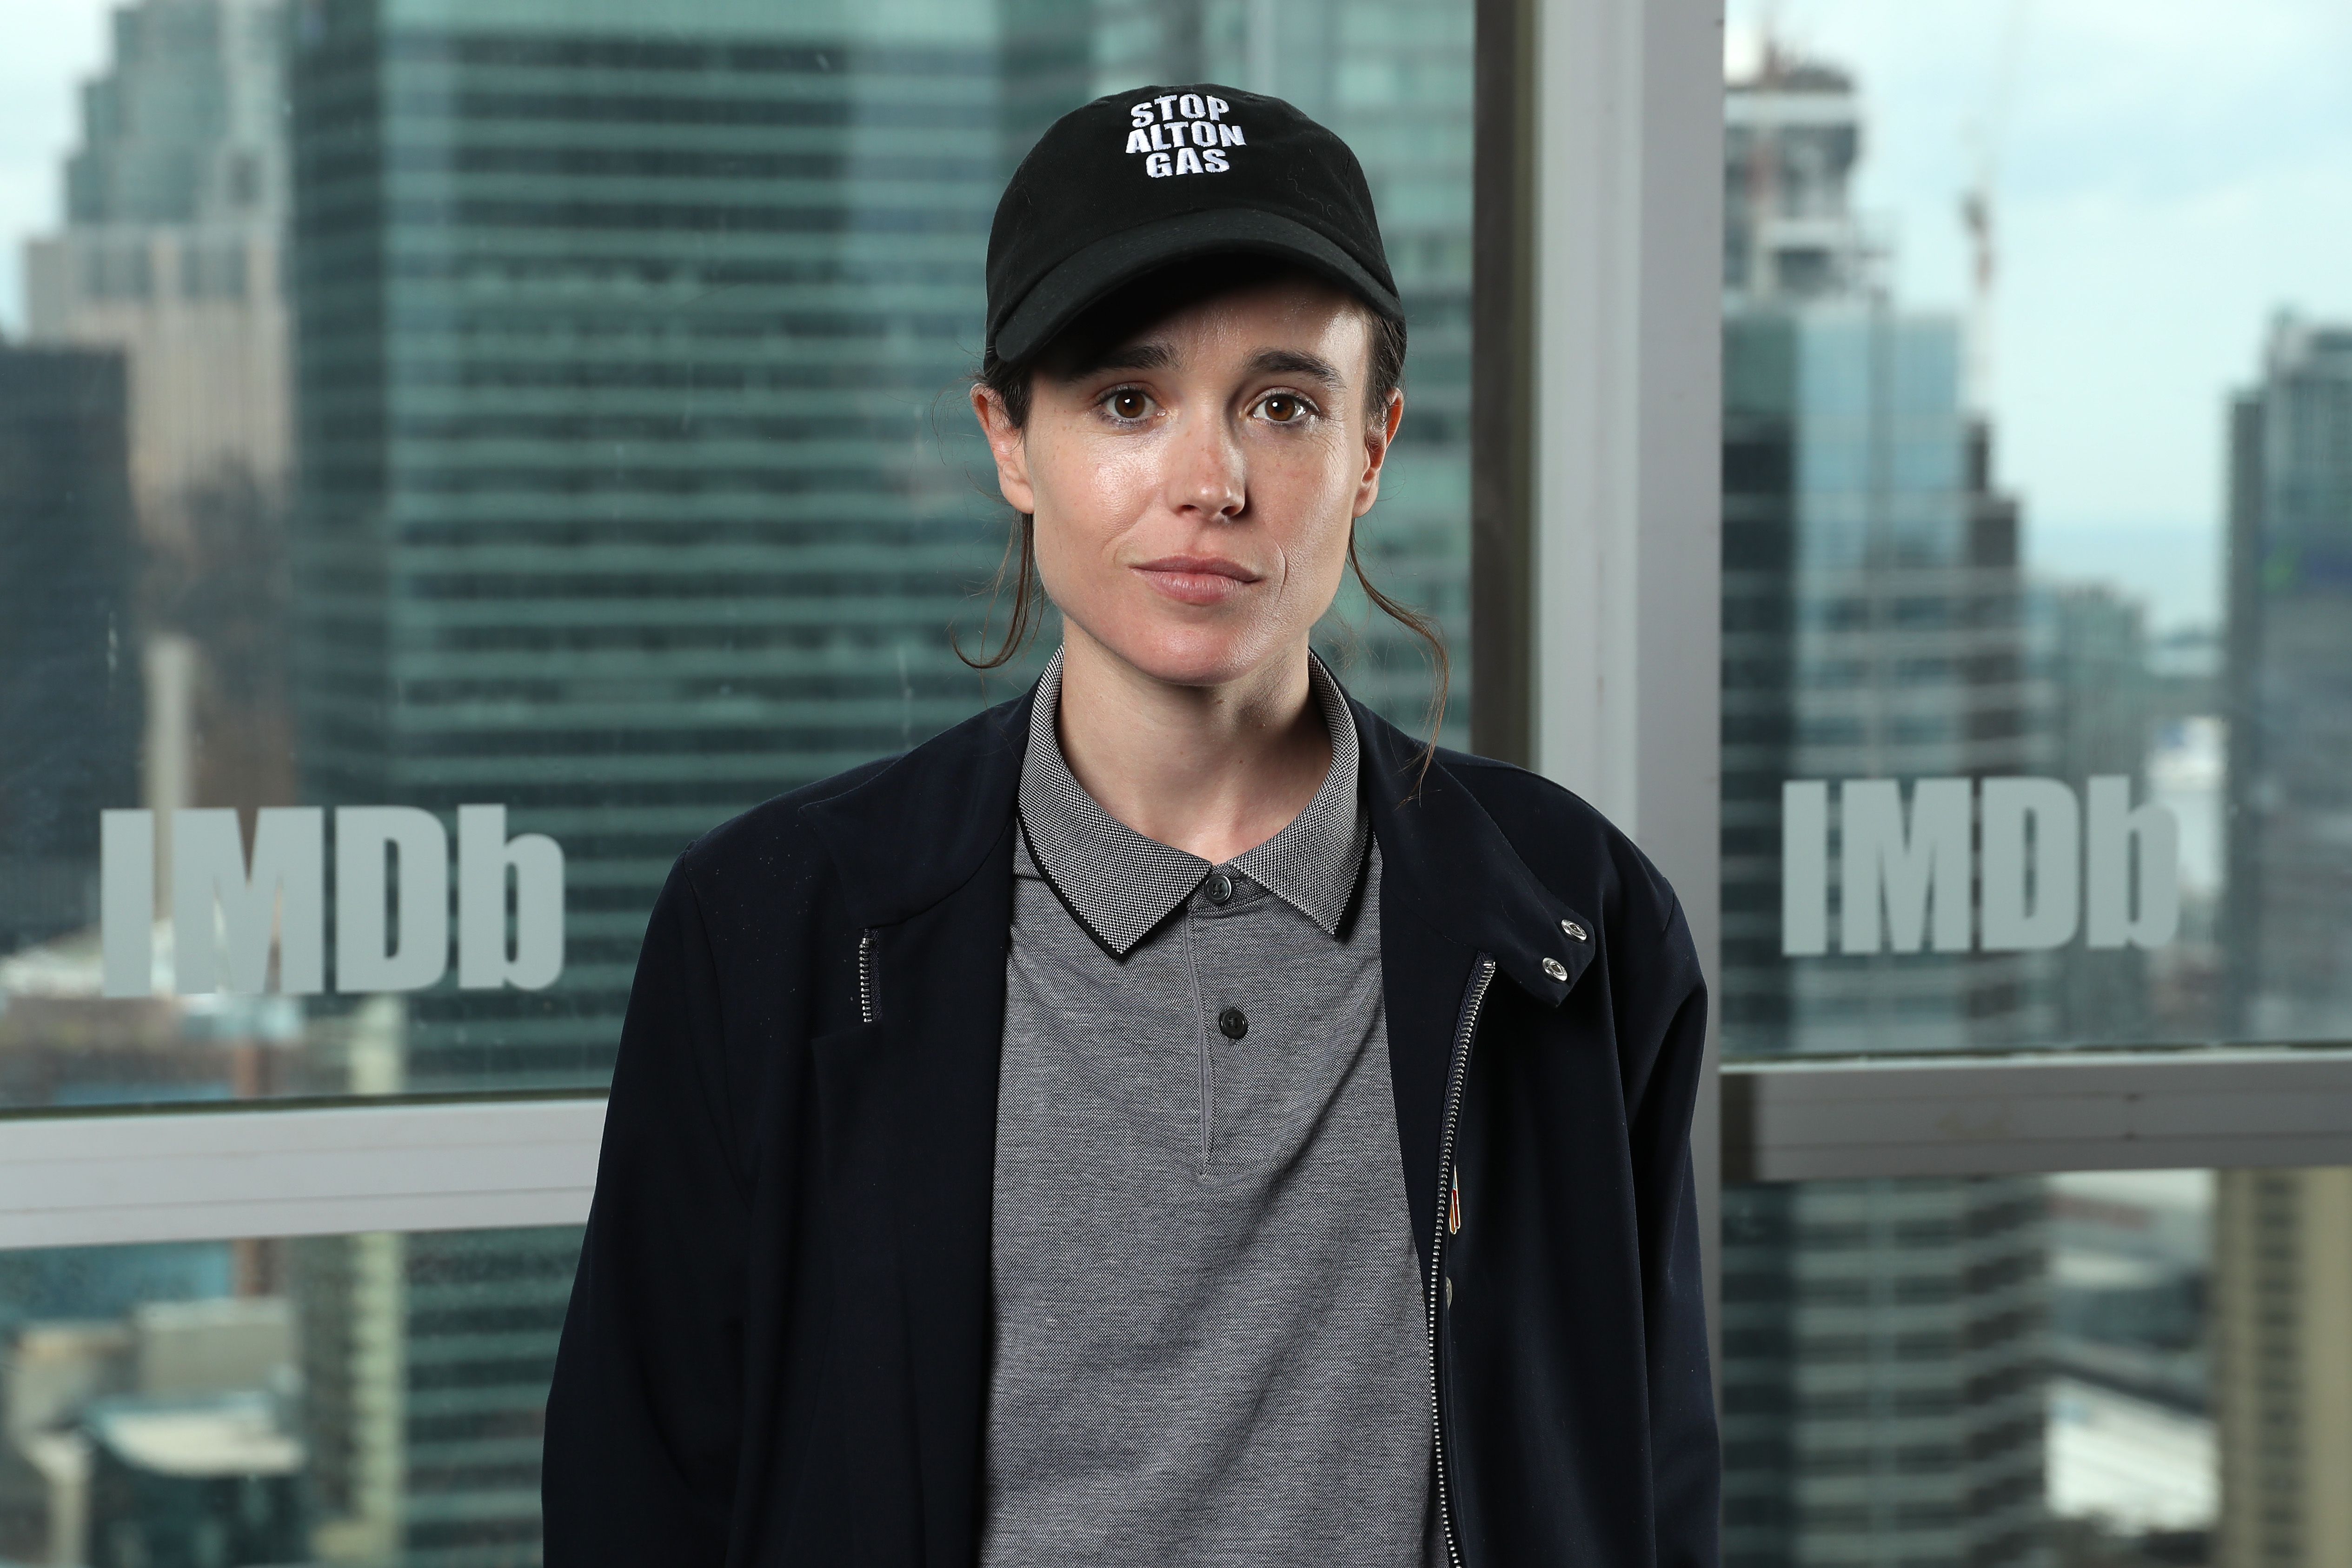  Ellen Page attends The IMDb Studio Presented By Intuit QuickBooks at Toronto 2019 at Bisha Hotel & Residences on September 07, 2019. | Getty Images 